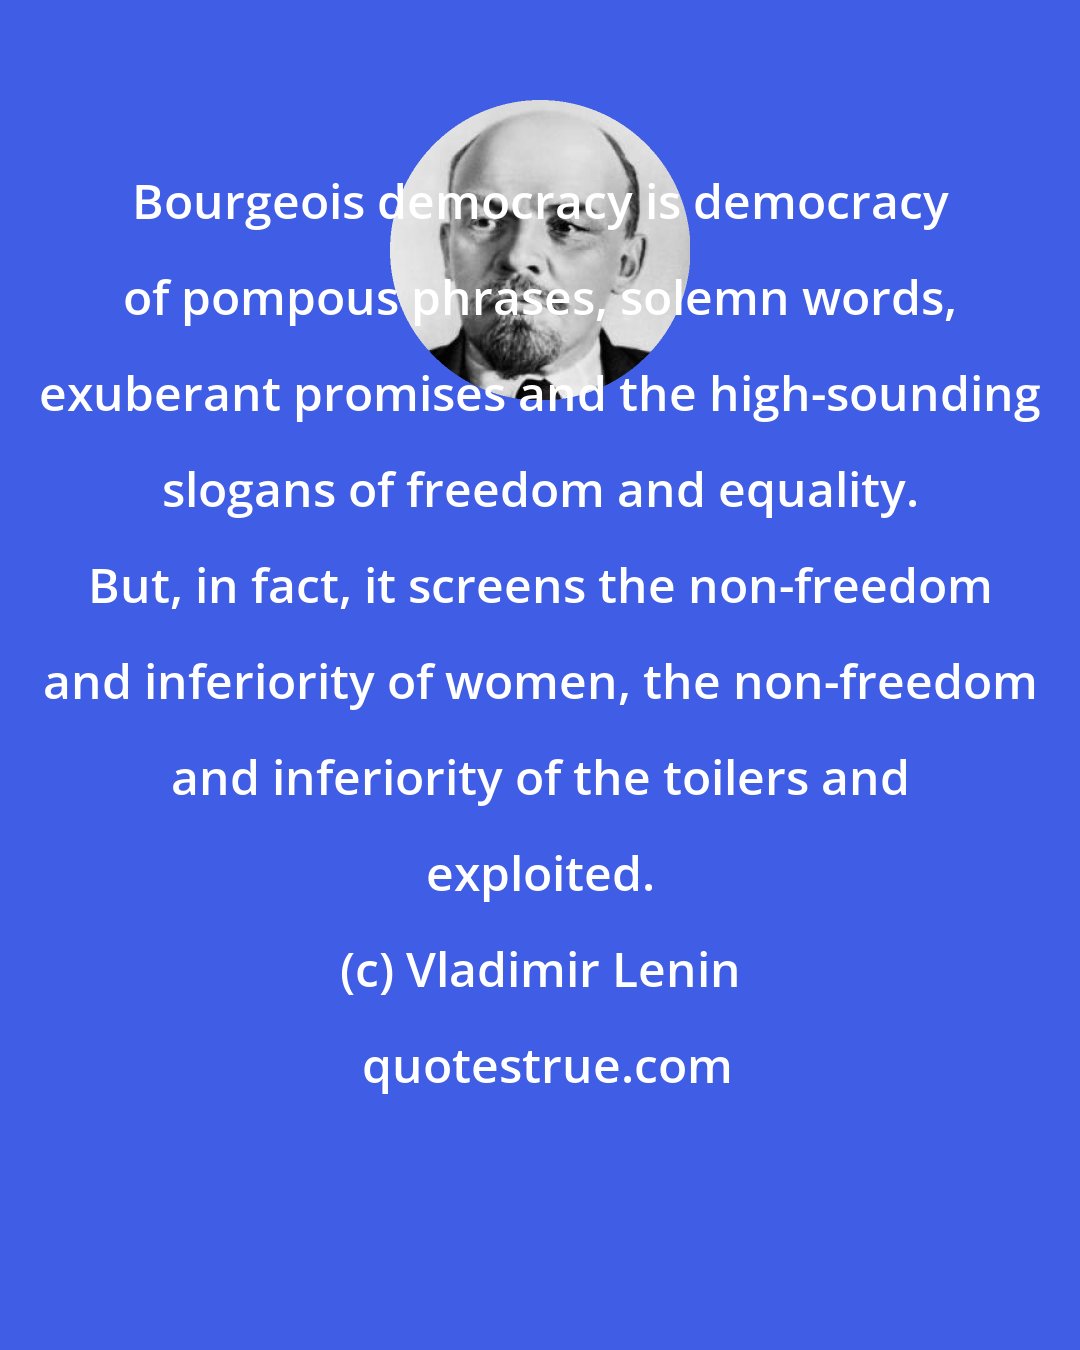 Vladimir Lenin: Bourgeois democracy is democracy of pompous phrases, solemn words, exuberant promises and the high-sounding slogans of freedom and equality. But, in fact, it screens the non-freedom and inferiority of women, the non-freedom and inferiority of the toilers and exploited.